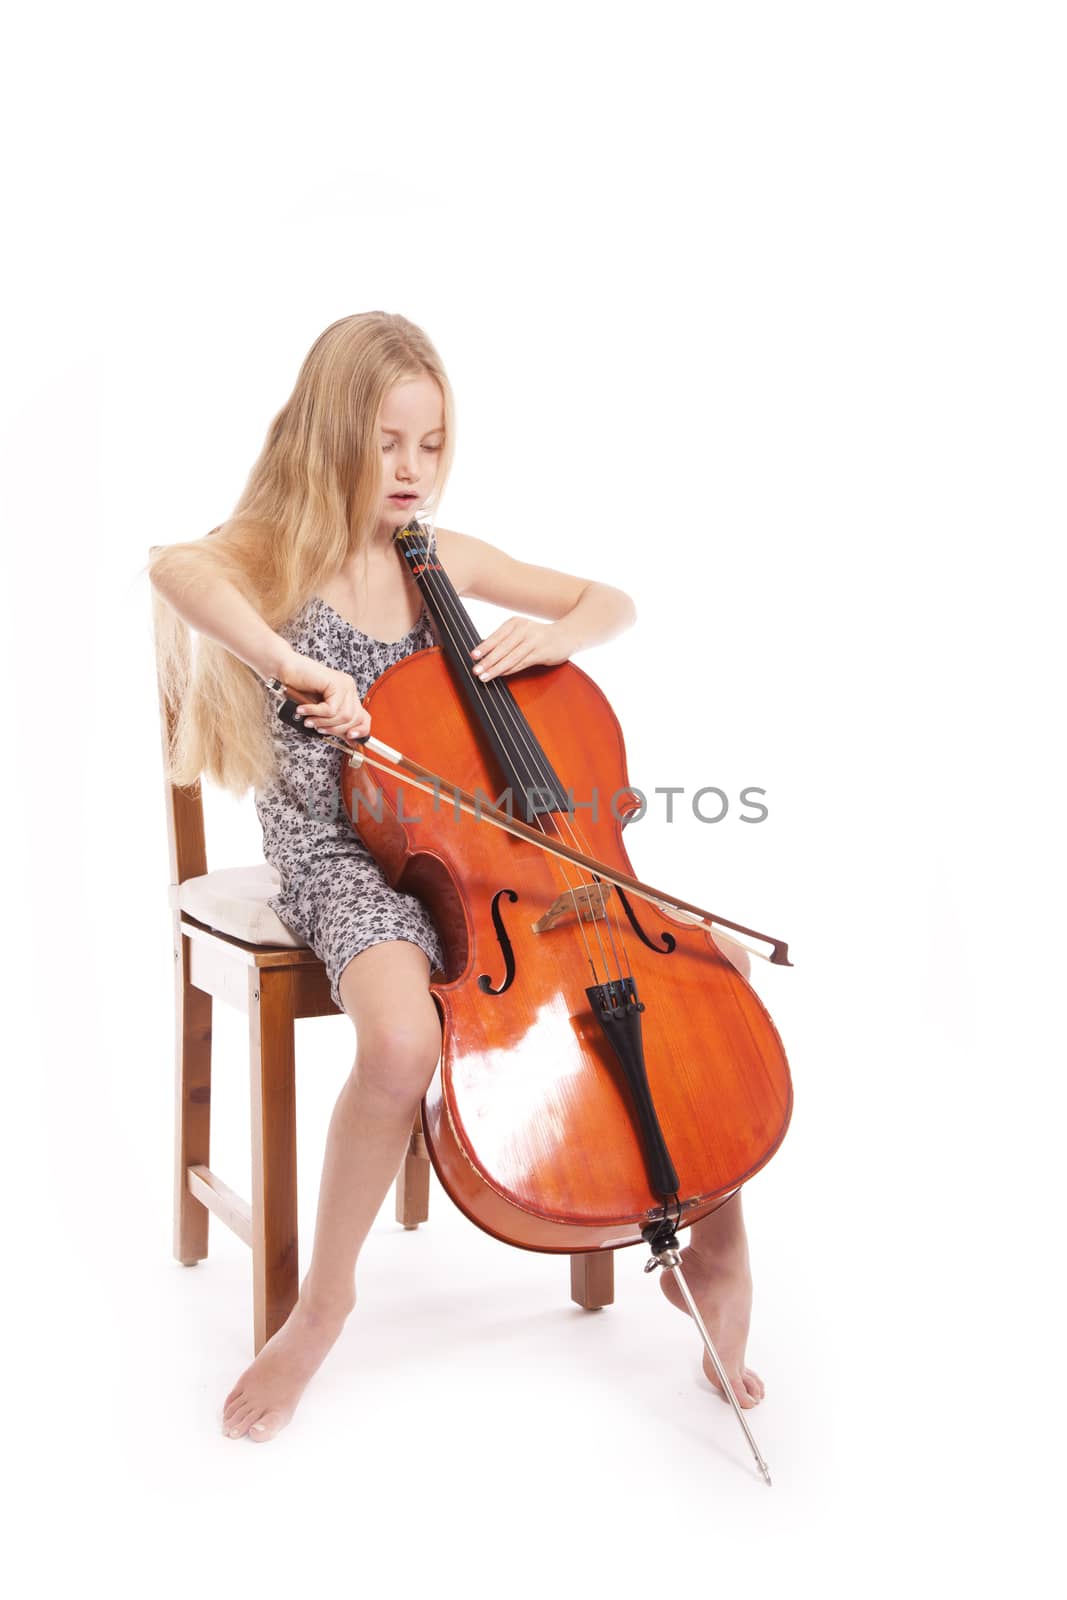 young girl in dress playing cello by ahavelaar